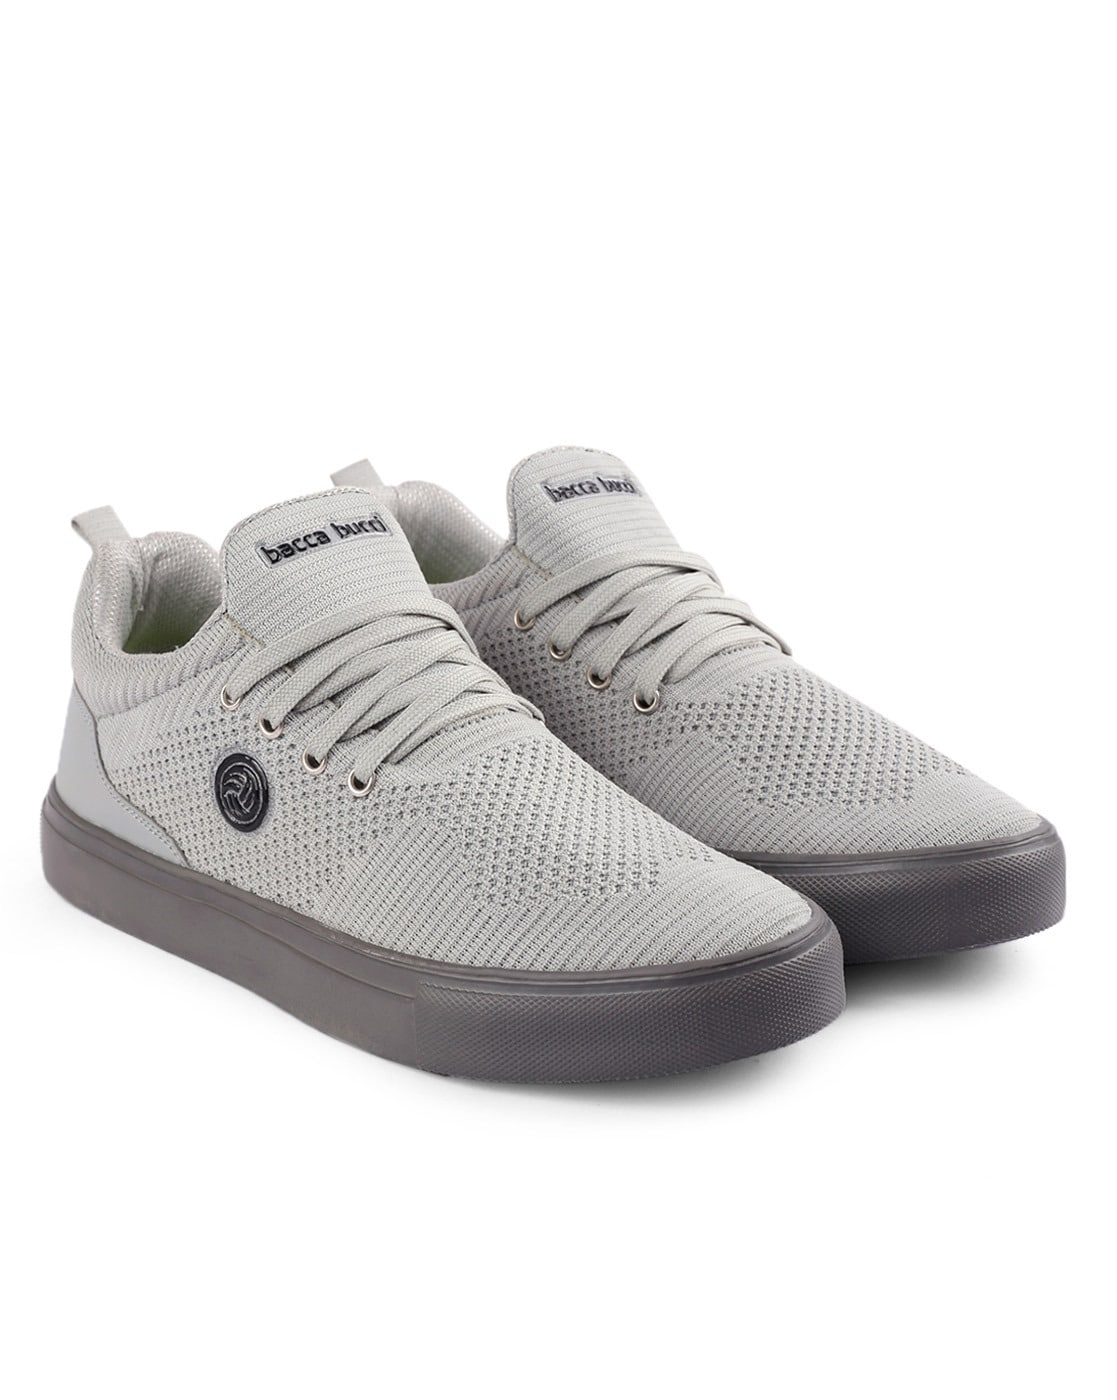 bacca bucci casual shoes